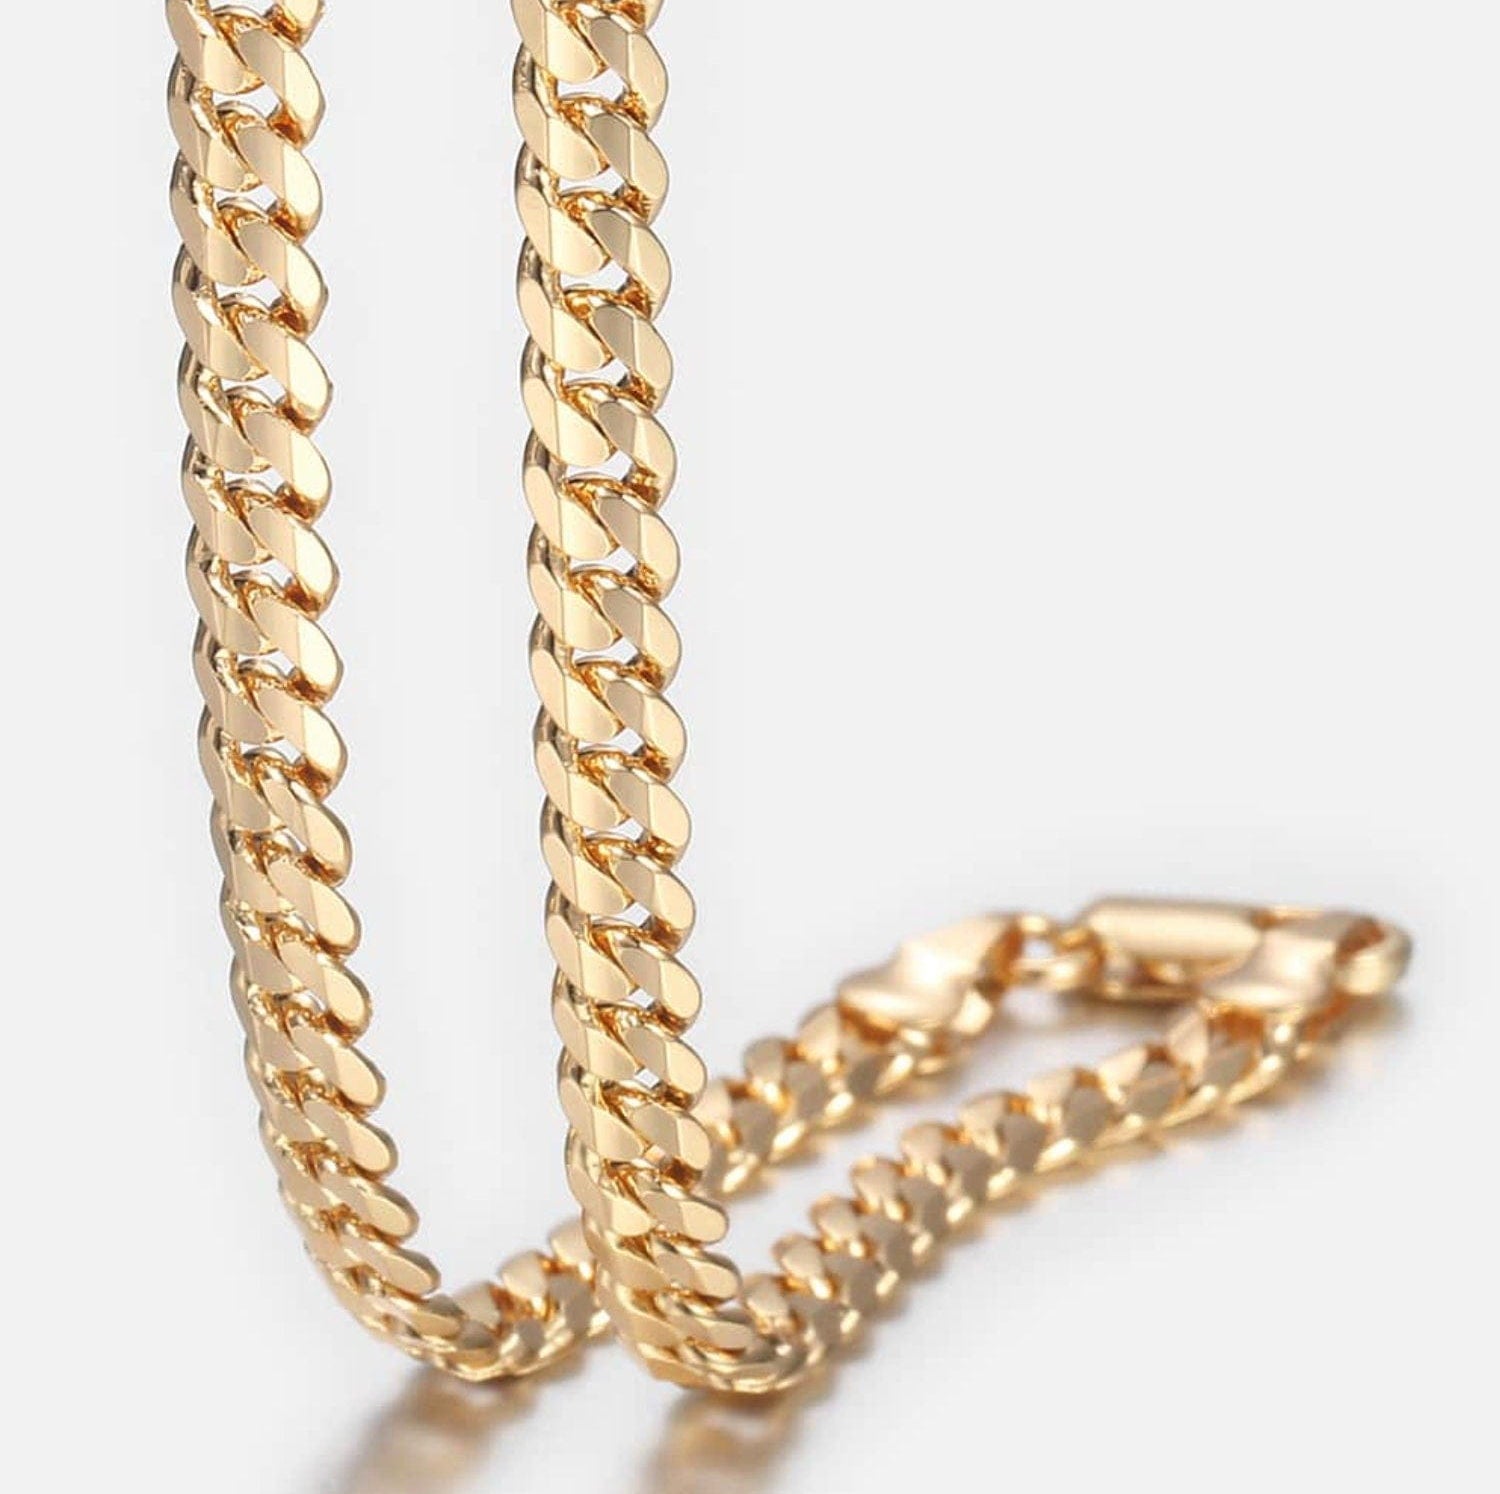 5MM Gold Cuban Link Chain Necklace for Men - 22in Stainless Steel Hip Hop Necklace - High Shine No Tarnish Water Resistant Layering Chain